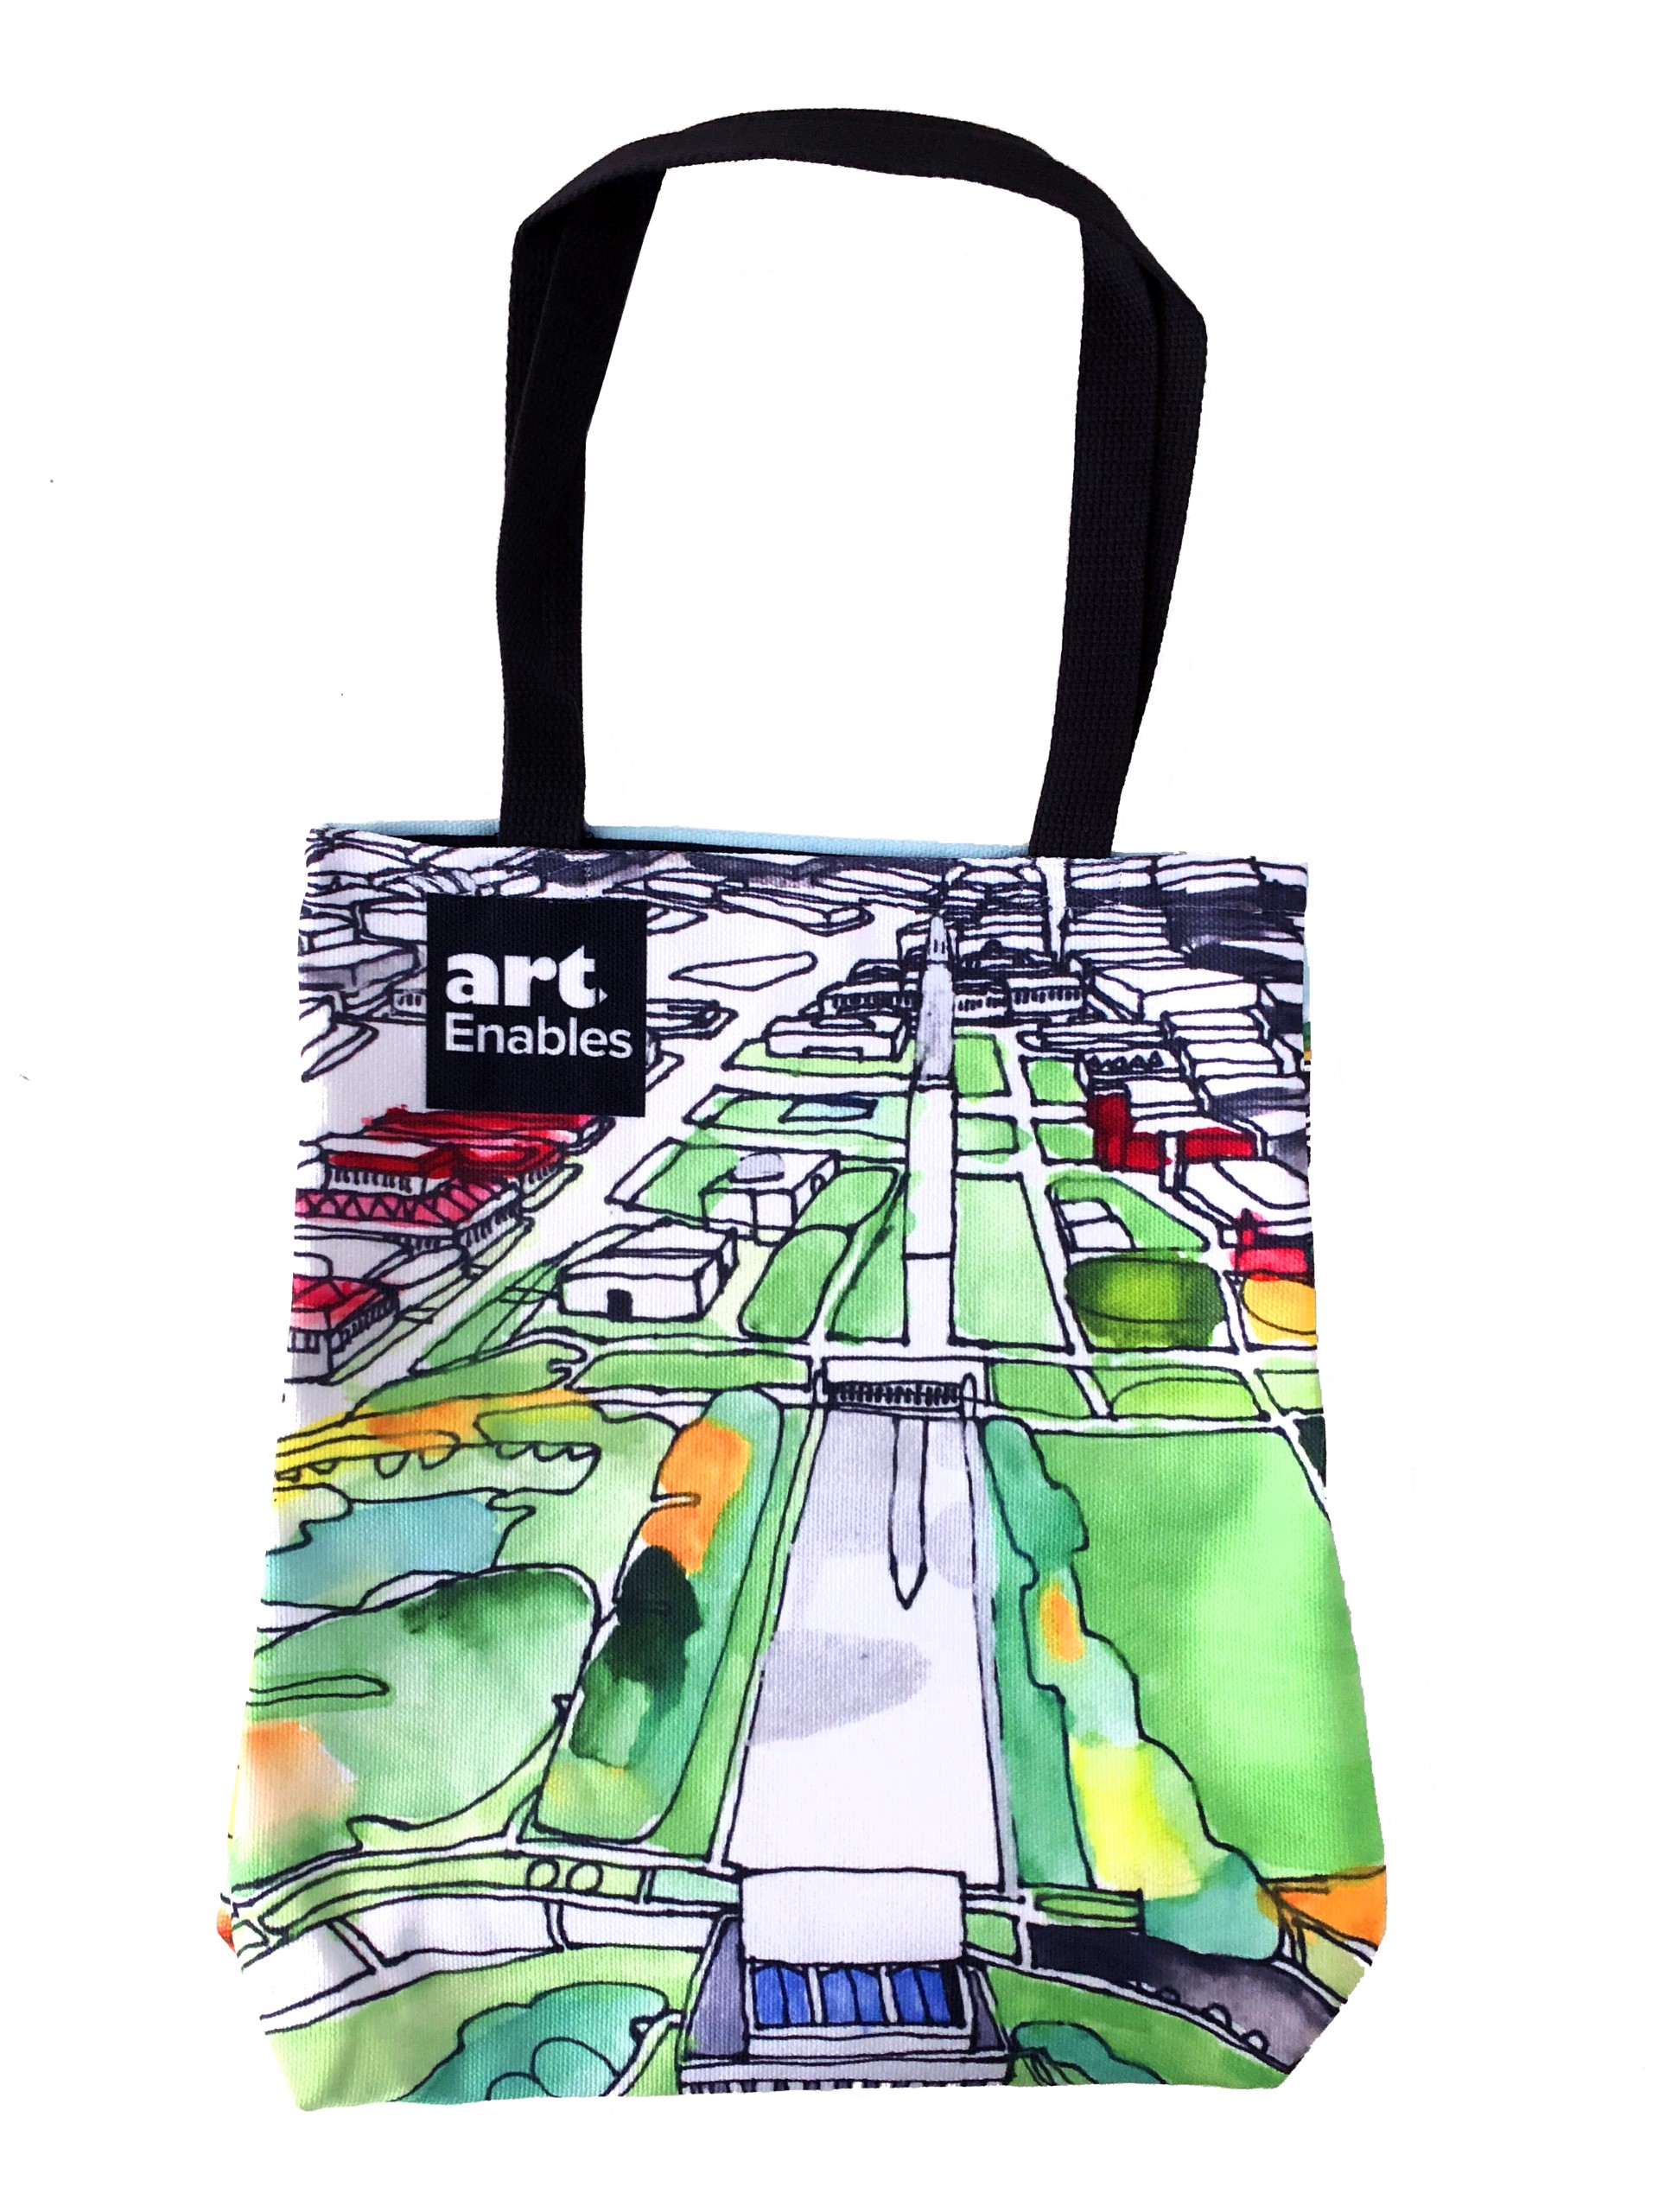 Charles Meissner DC tote bag by Art Enables Merchandise